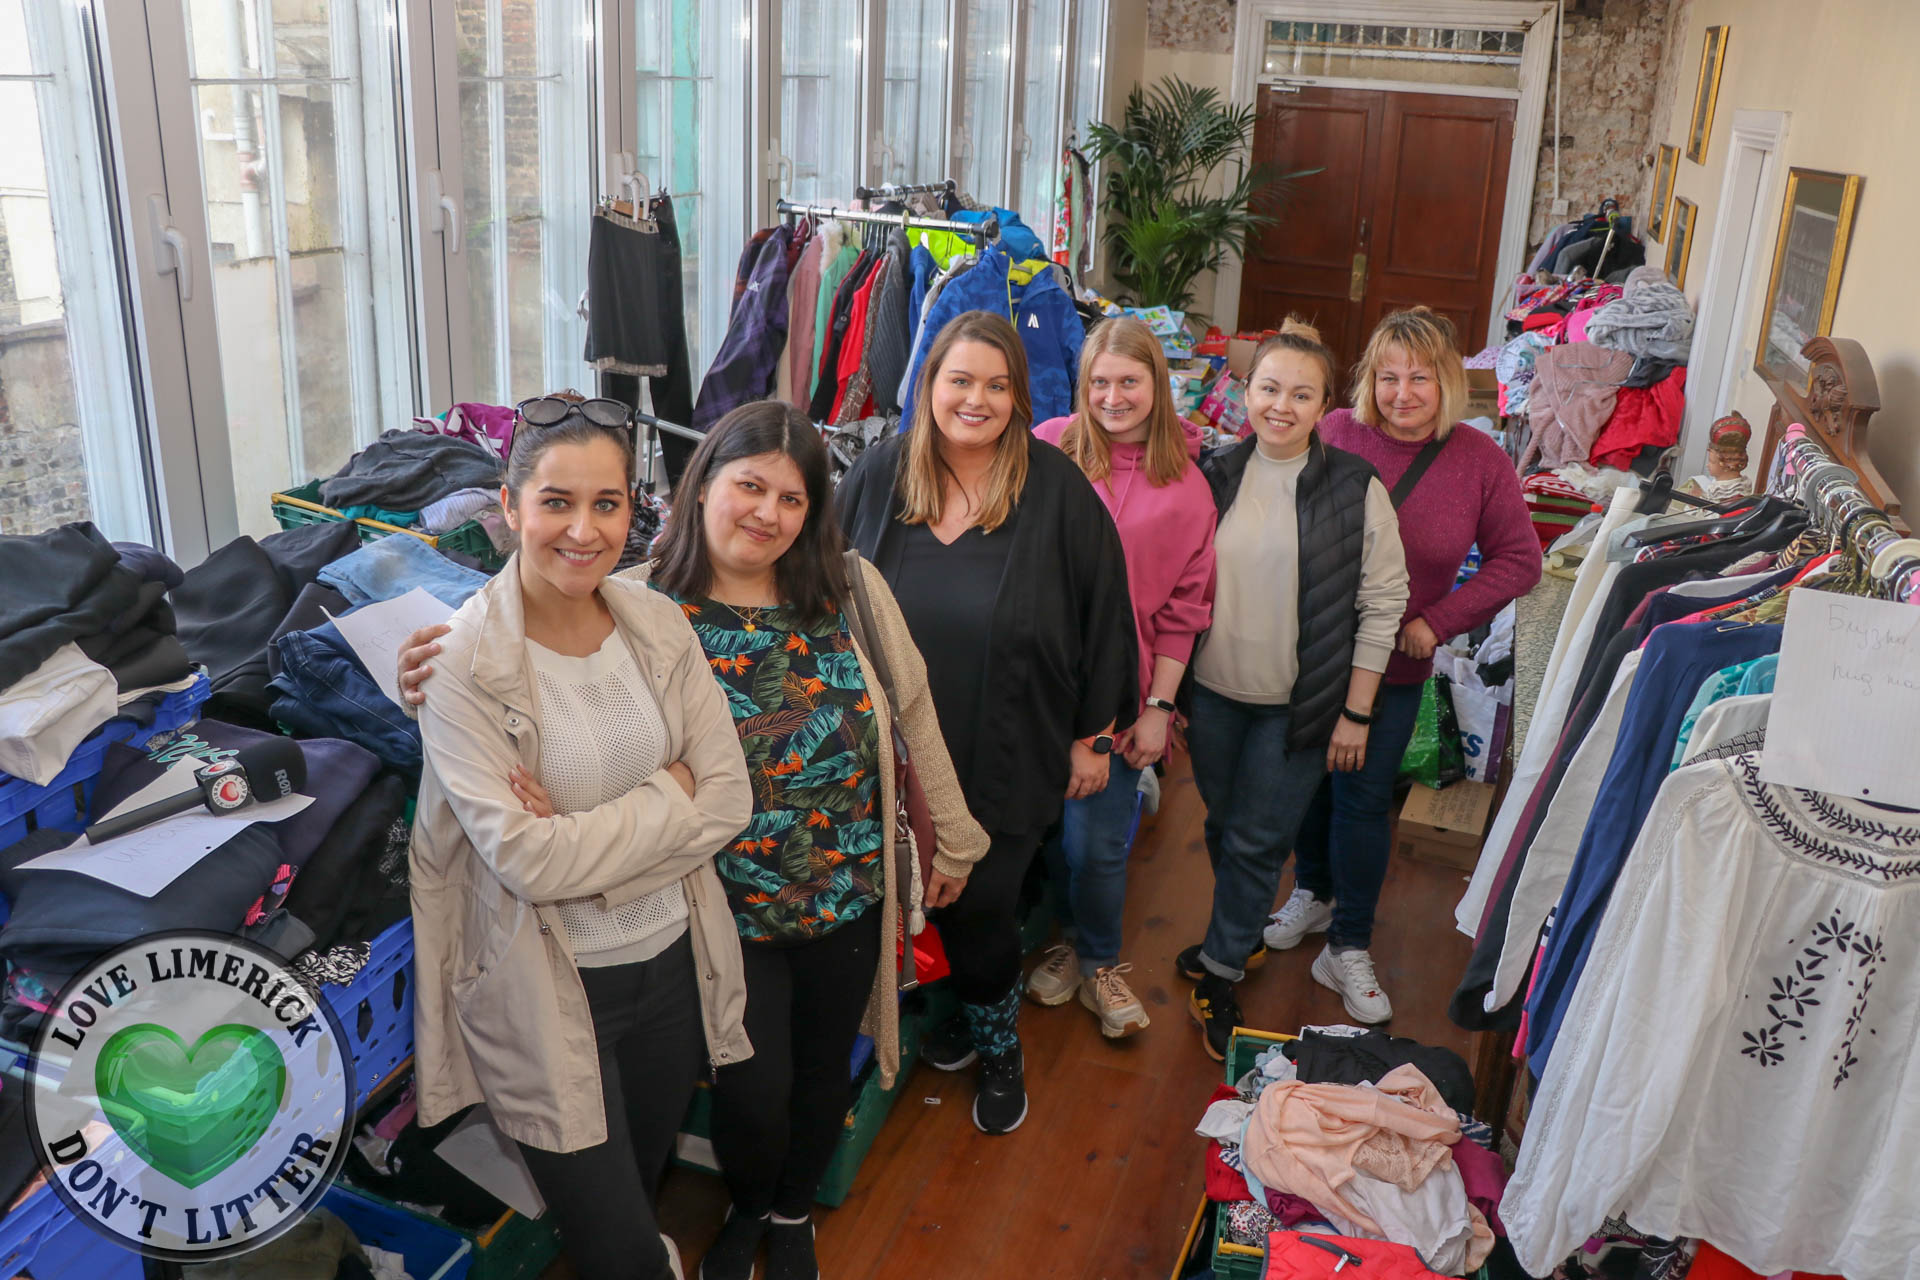 Zero Cost Shop Limerick - Pictured are organisers Anna Mazeika and Kamila Turzynska with volunteer Avril Harty and Iryna, Yeva and Svetlana, who are all volunteers from the Ukraine. Picture: Richard Lynch/ilovelimerick.